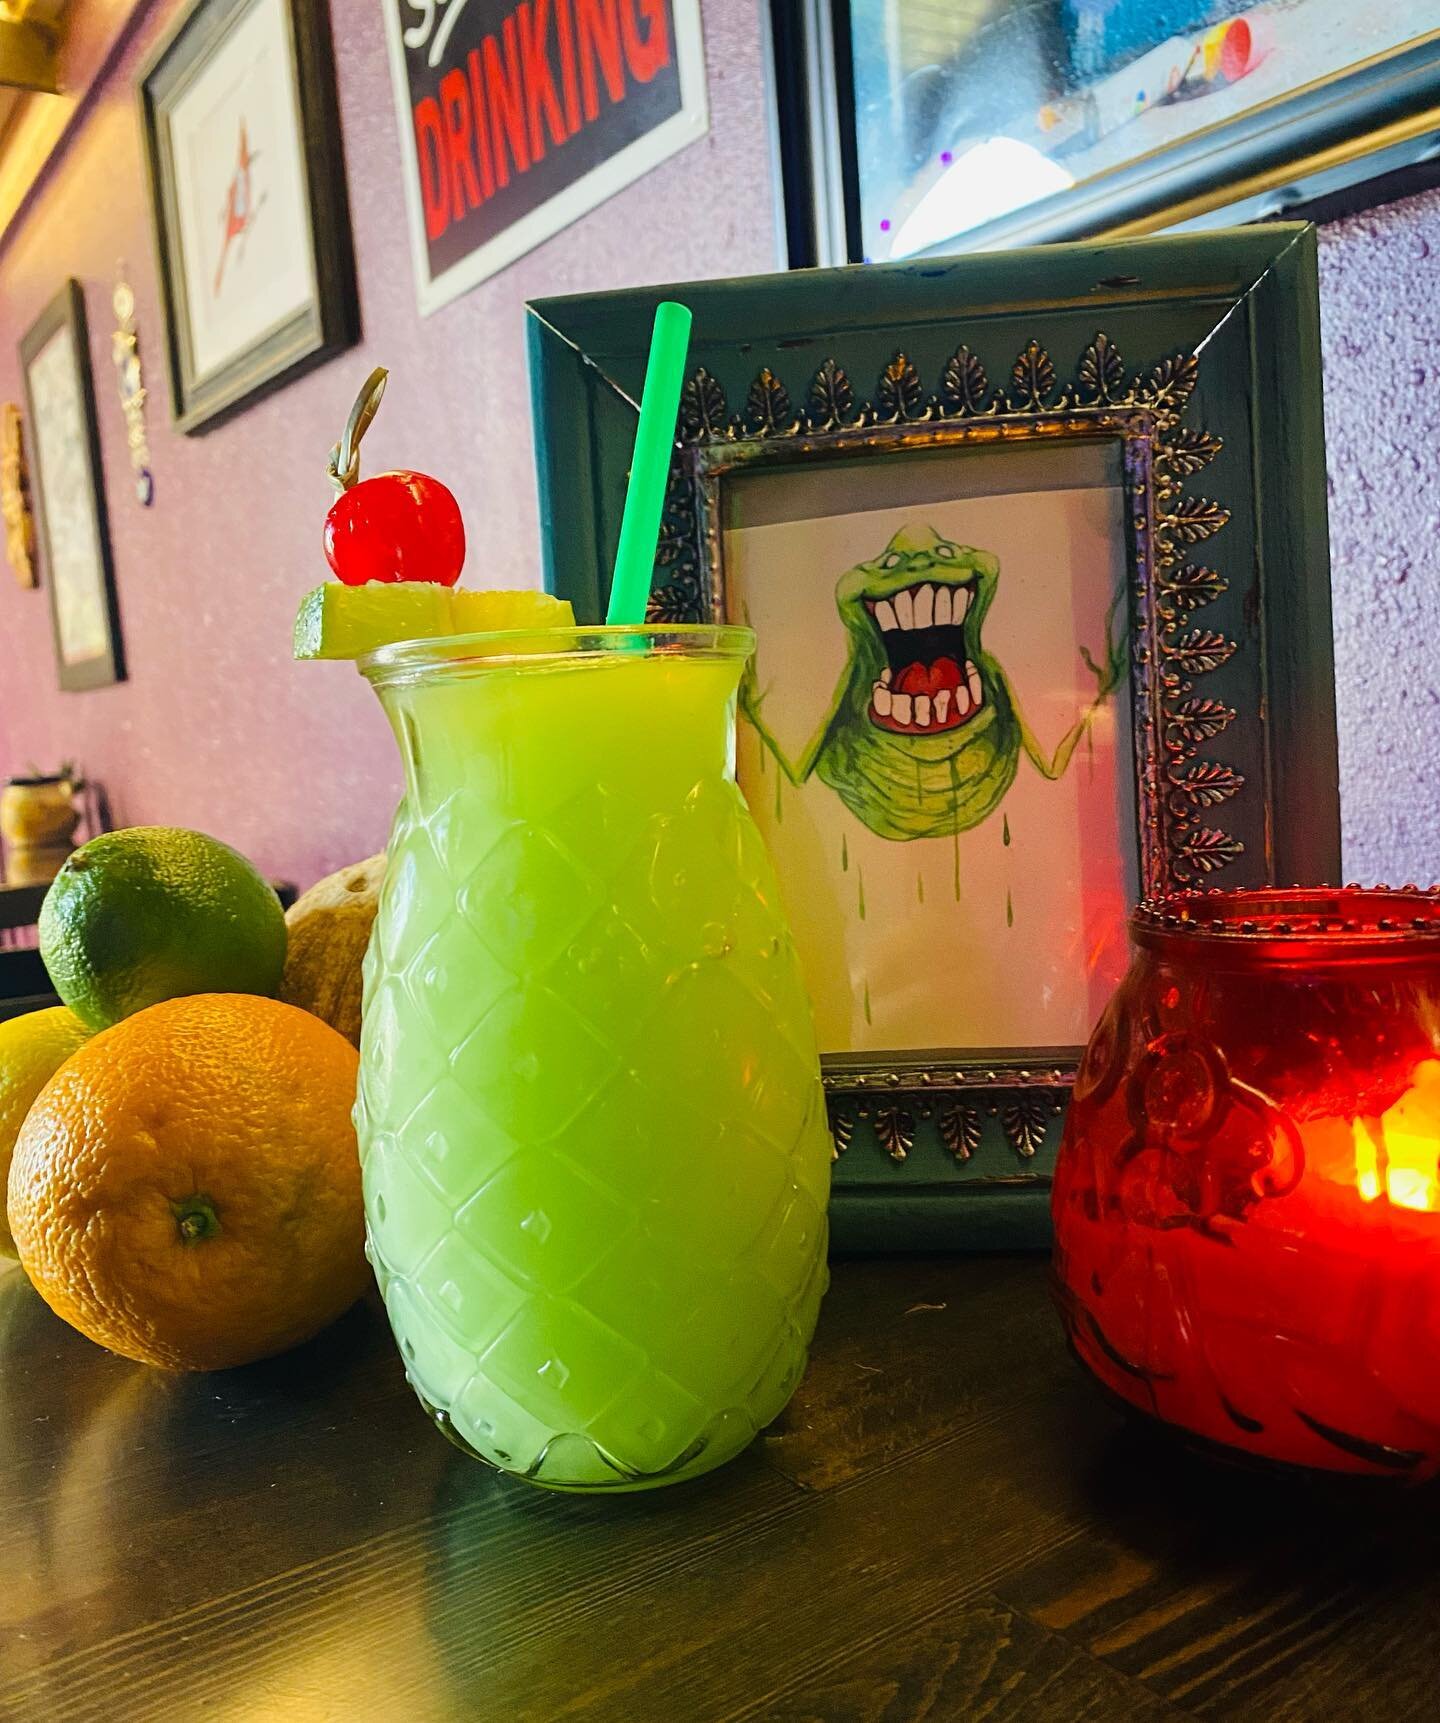 NiteOwl&rsquo;s Ecto Cooler inspired Slushee 👻! 
.
.
A tropical blend of fruit juices, vodka, and rum 🍹
.
.
Available Tonight 🦉
.
.
737 Main St. Unit F. (8th &amp; Main) 
Open Tue-Sat 5pm to LastCall &amp; (Closed Sunday &amp; Monday)
.
.
#NiteOwl